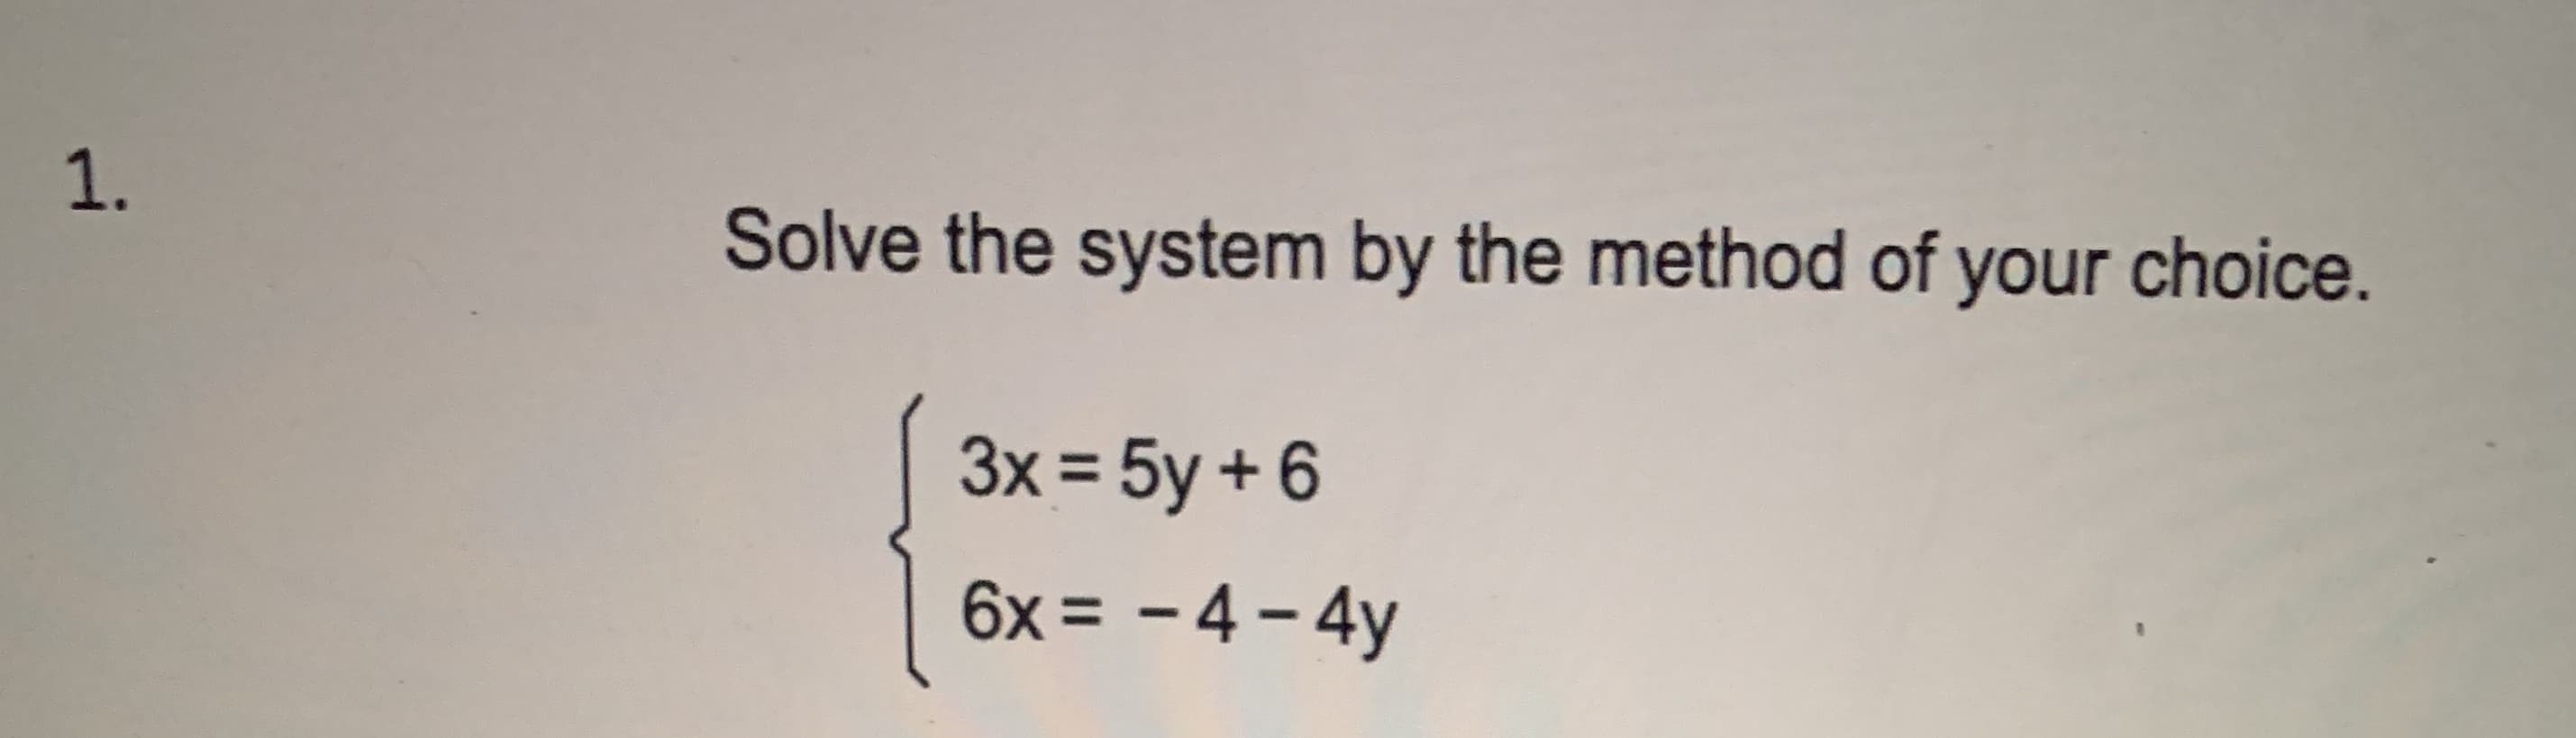 Solve the system by the method of your choice.
3x = 5y + 6
6x = - 4 – 4y
%3D
